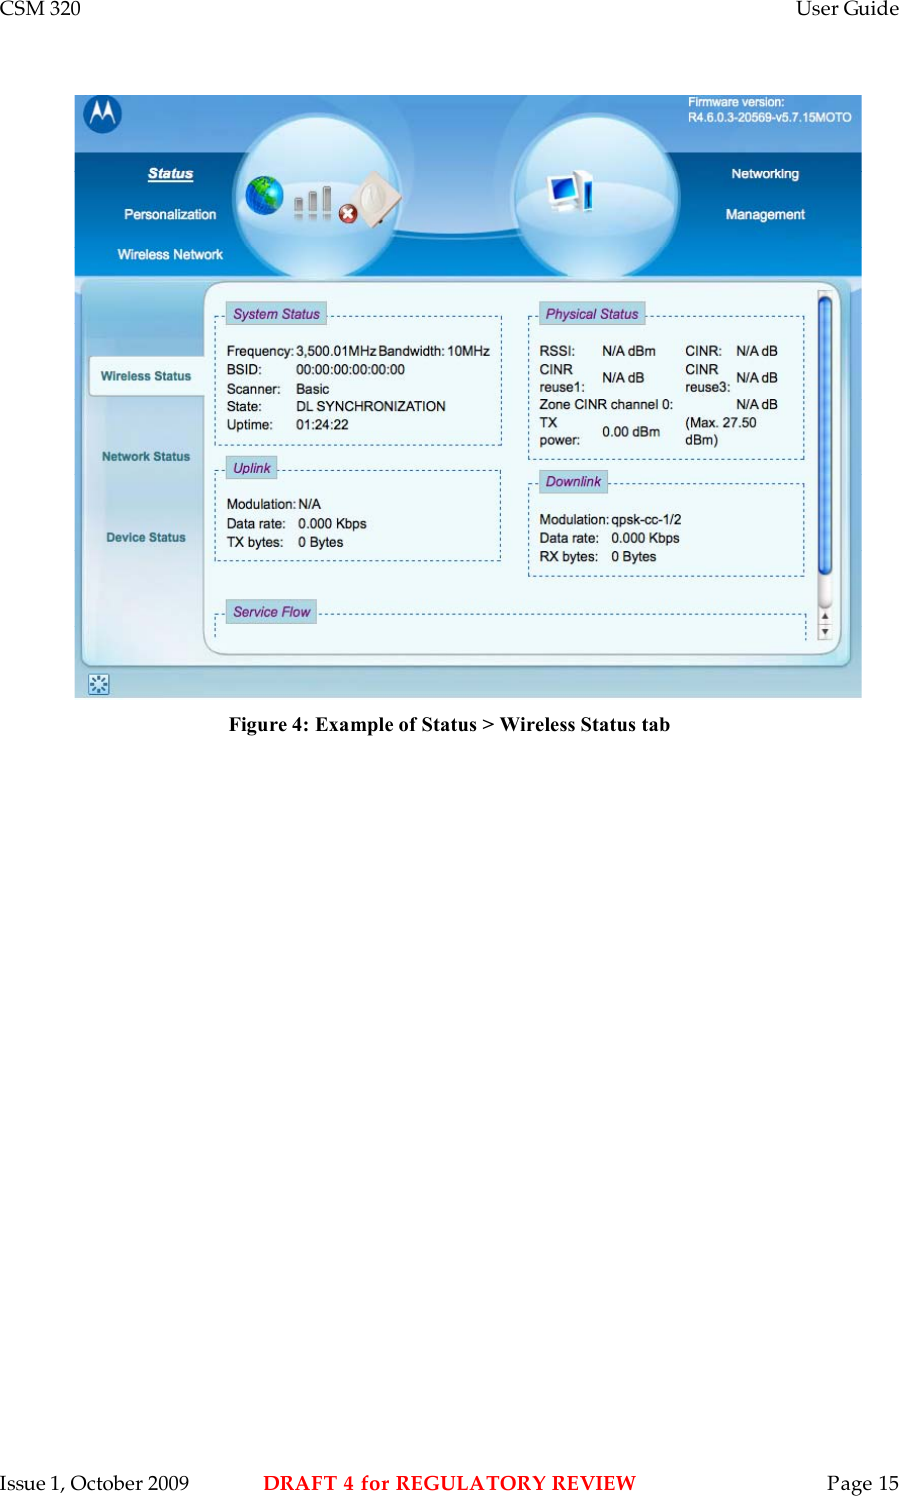 CSM 320    User Guide    Issue 1, October 2009  DRAFT 4 for REGULATORY REVIEW  Page 15  Figure 4: Example of Status &gt; Wireless Status tab 